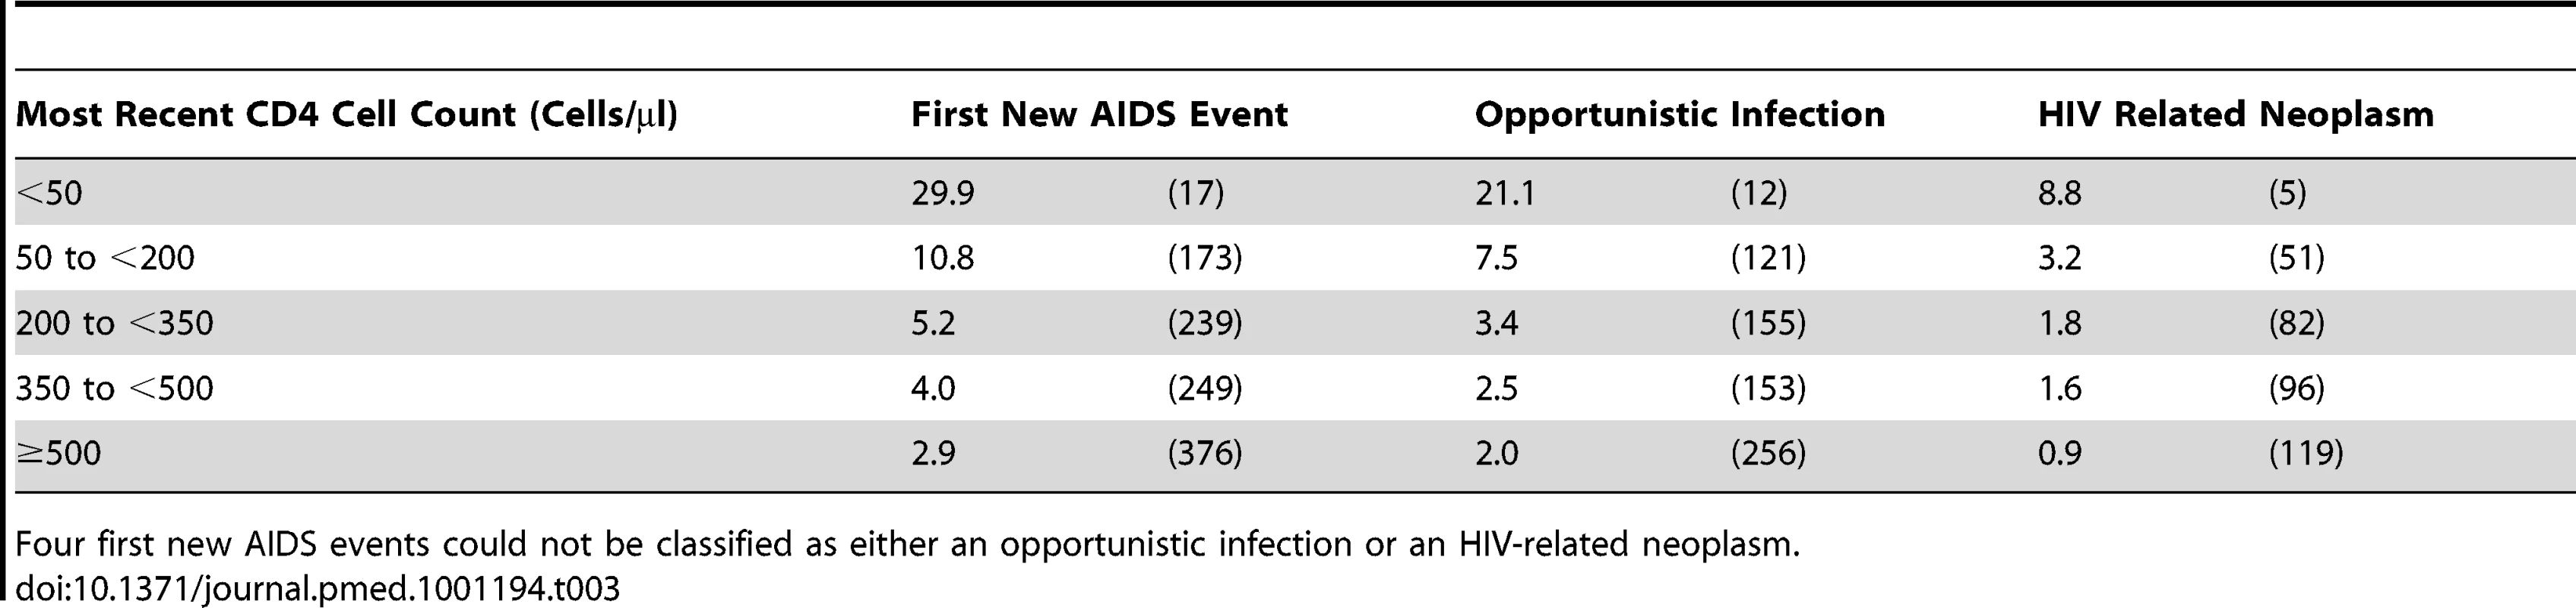 Event rates in CD4 strata among the 75,336 patients with at least one suppression episode while on cART: event rates per 1,000 y of suppressed viral load (number of events) for a first new AIDS event, with each event then classified as either an opportunistic infection or a HIV related neoplasm.